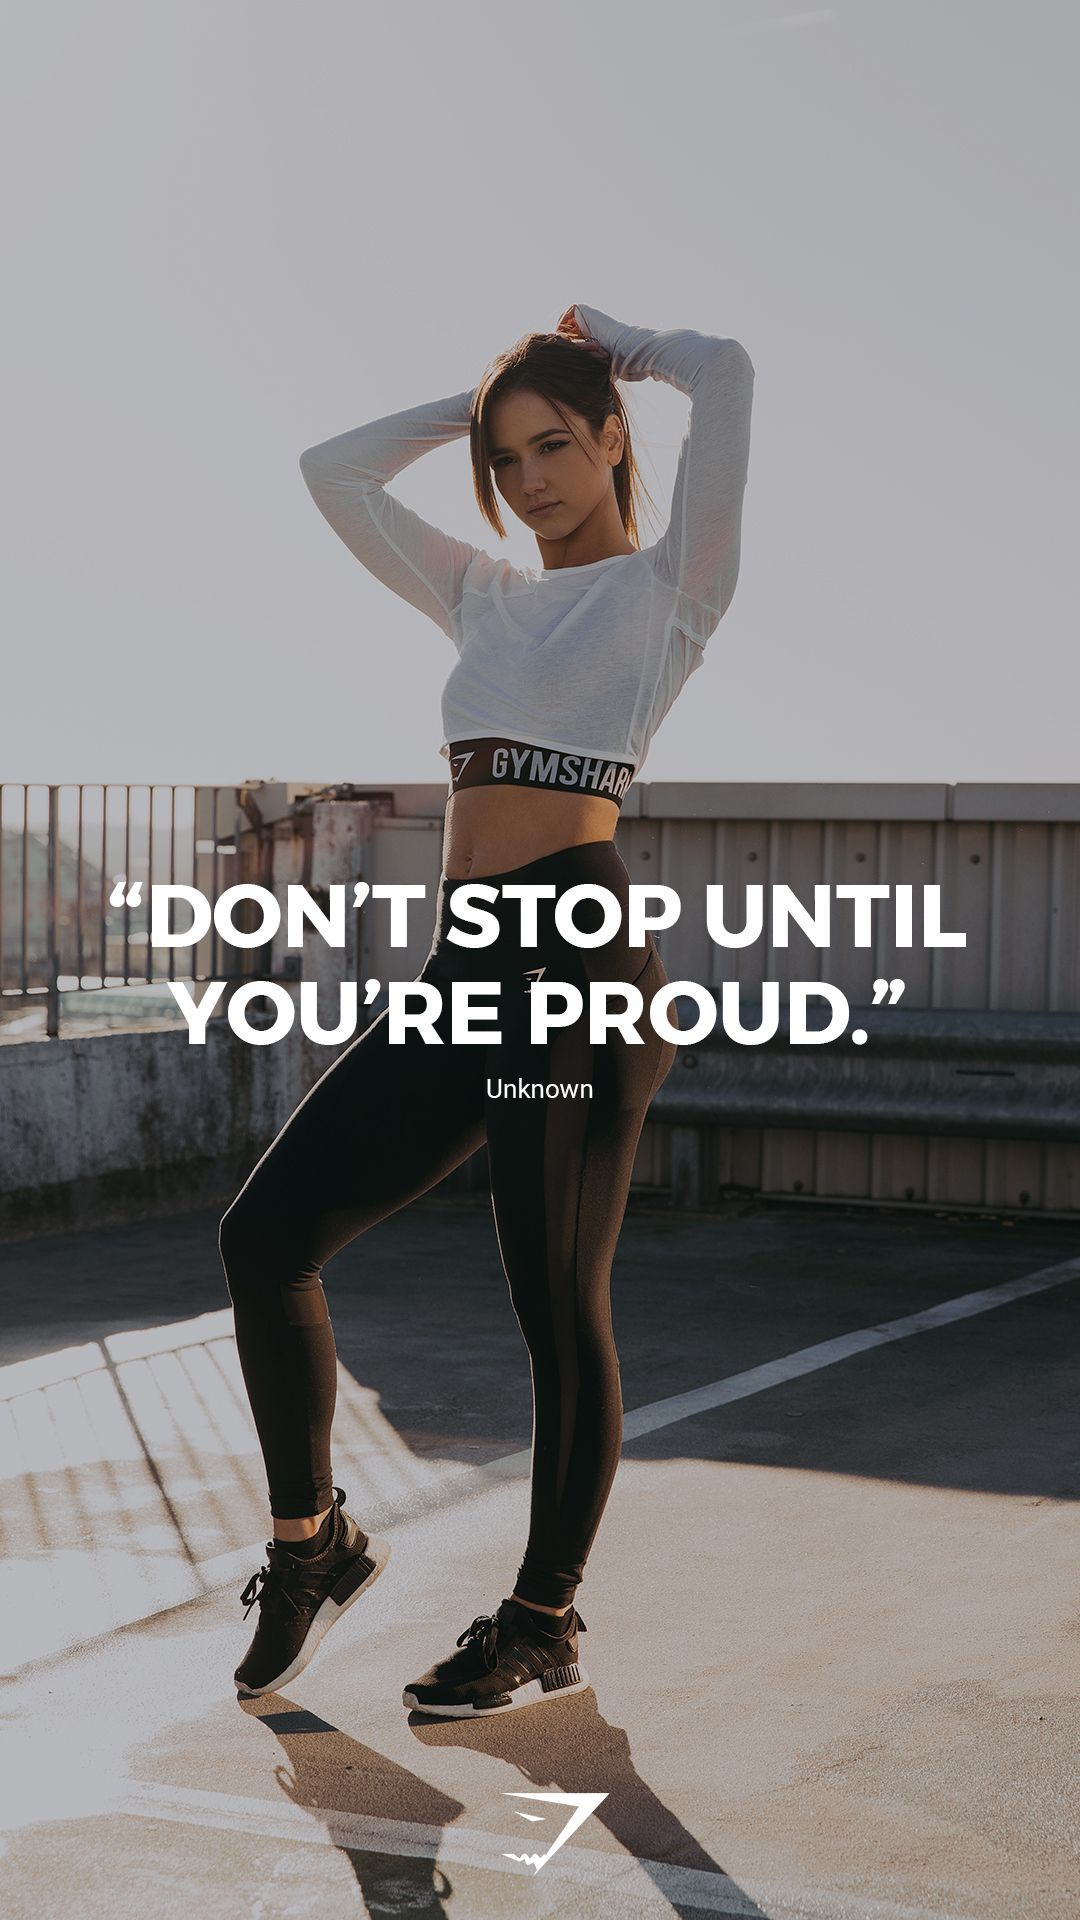 Don't stop until you're proud. - #gymshark #motivation. Fitness inspiration, Fun workouts, Fit girl motivation